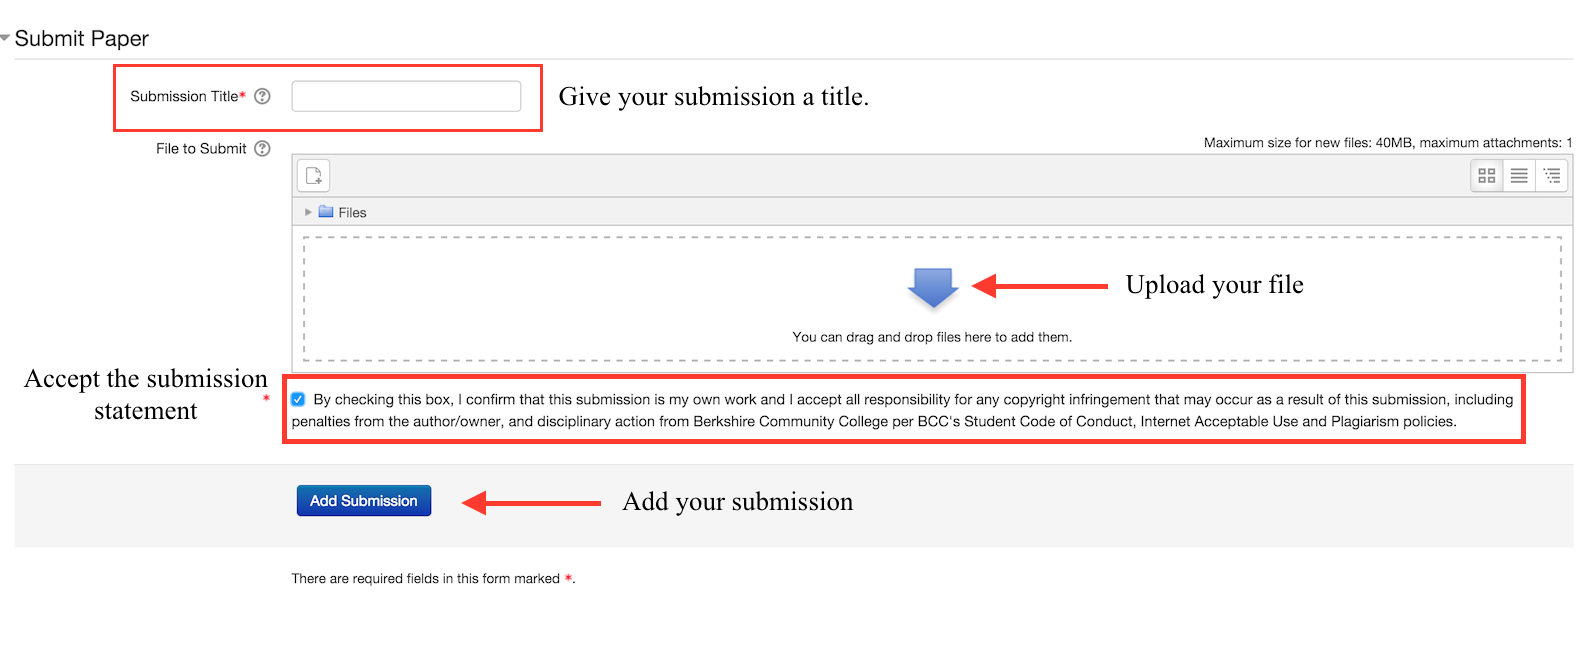 Screenshot of the Turnitin Submit Paper screen.